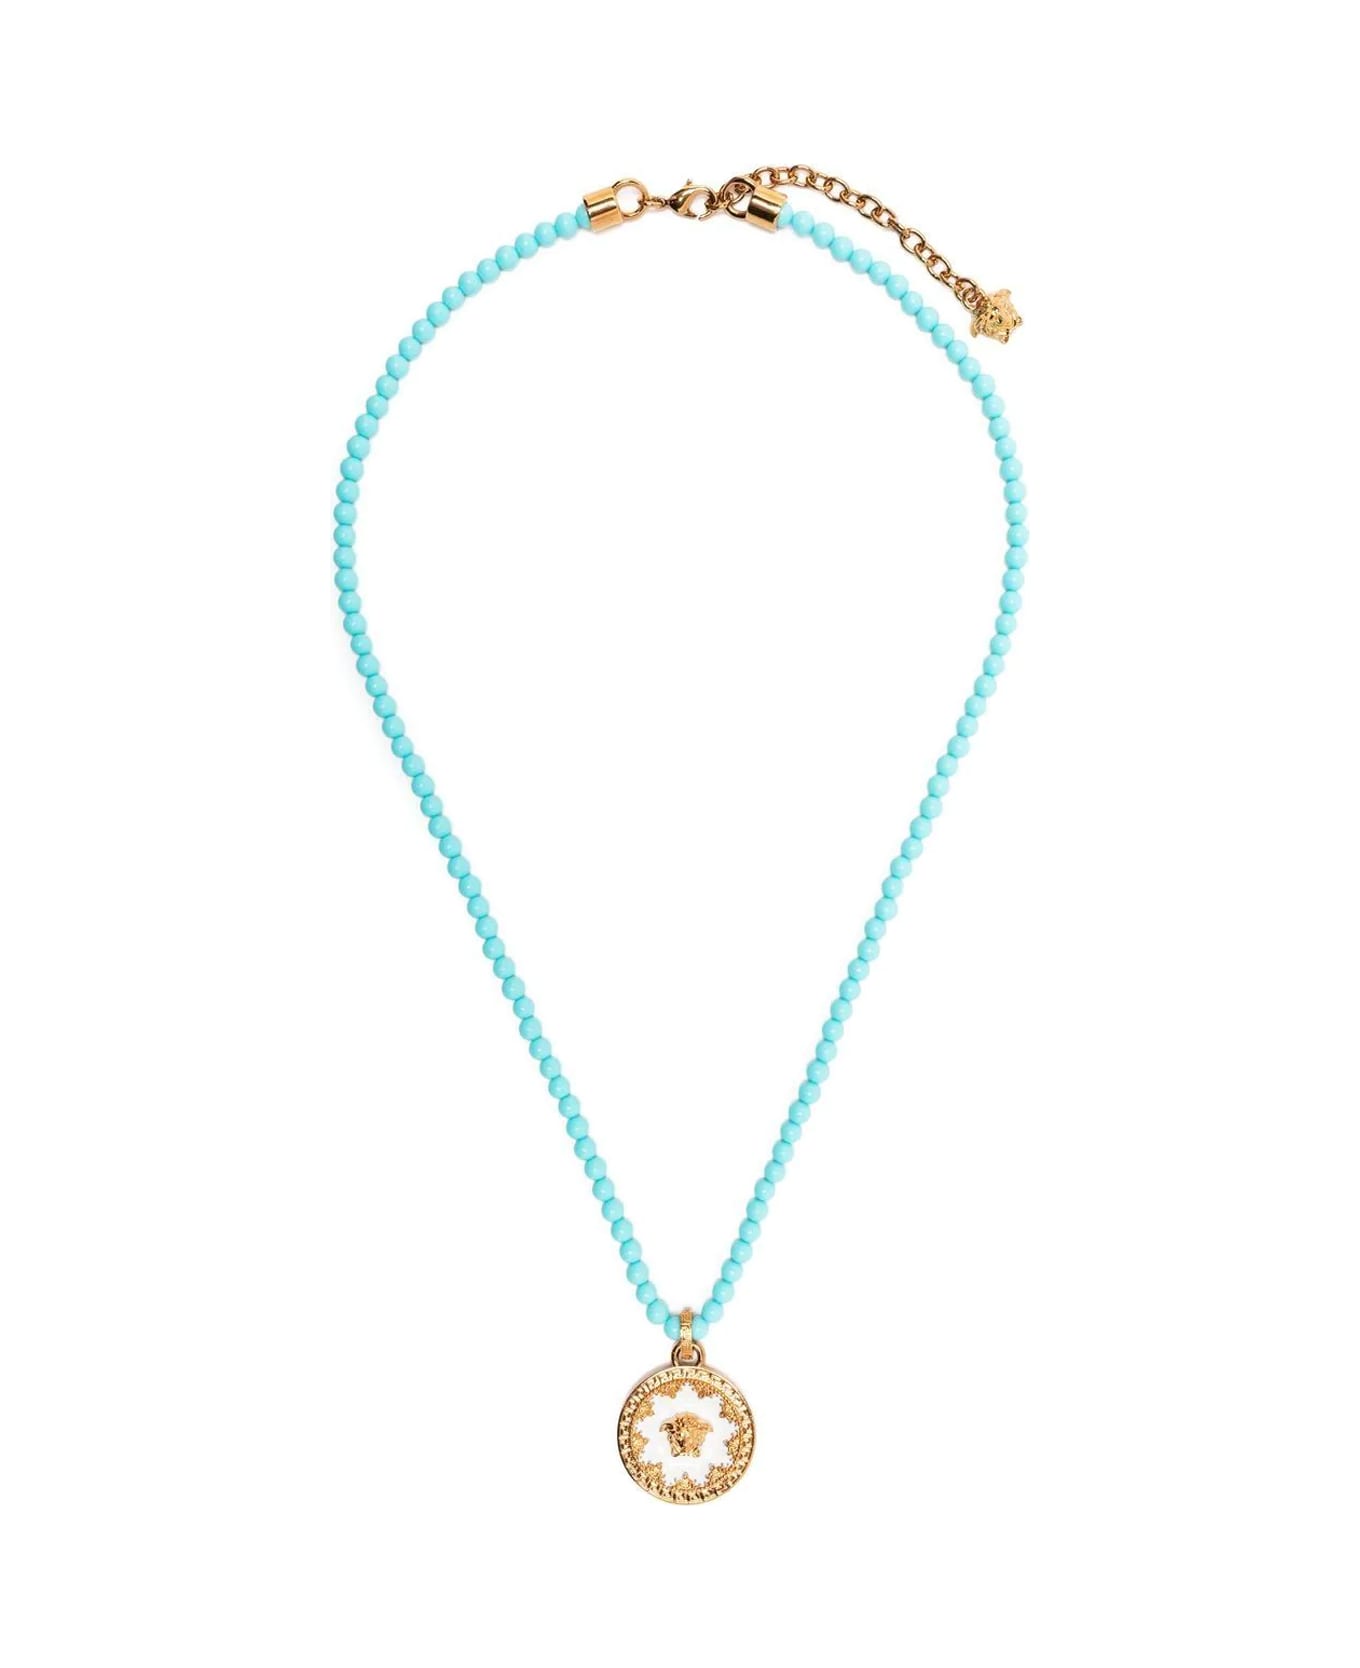 Versace Coral Pendant Necklace - Jhlo Versace Gold White Turquoise